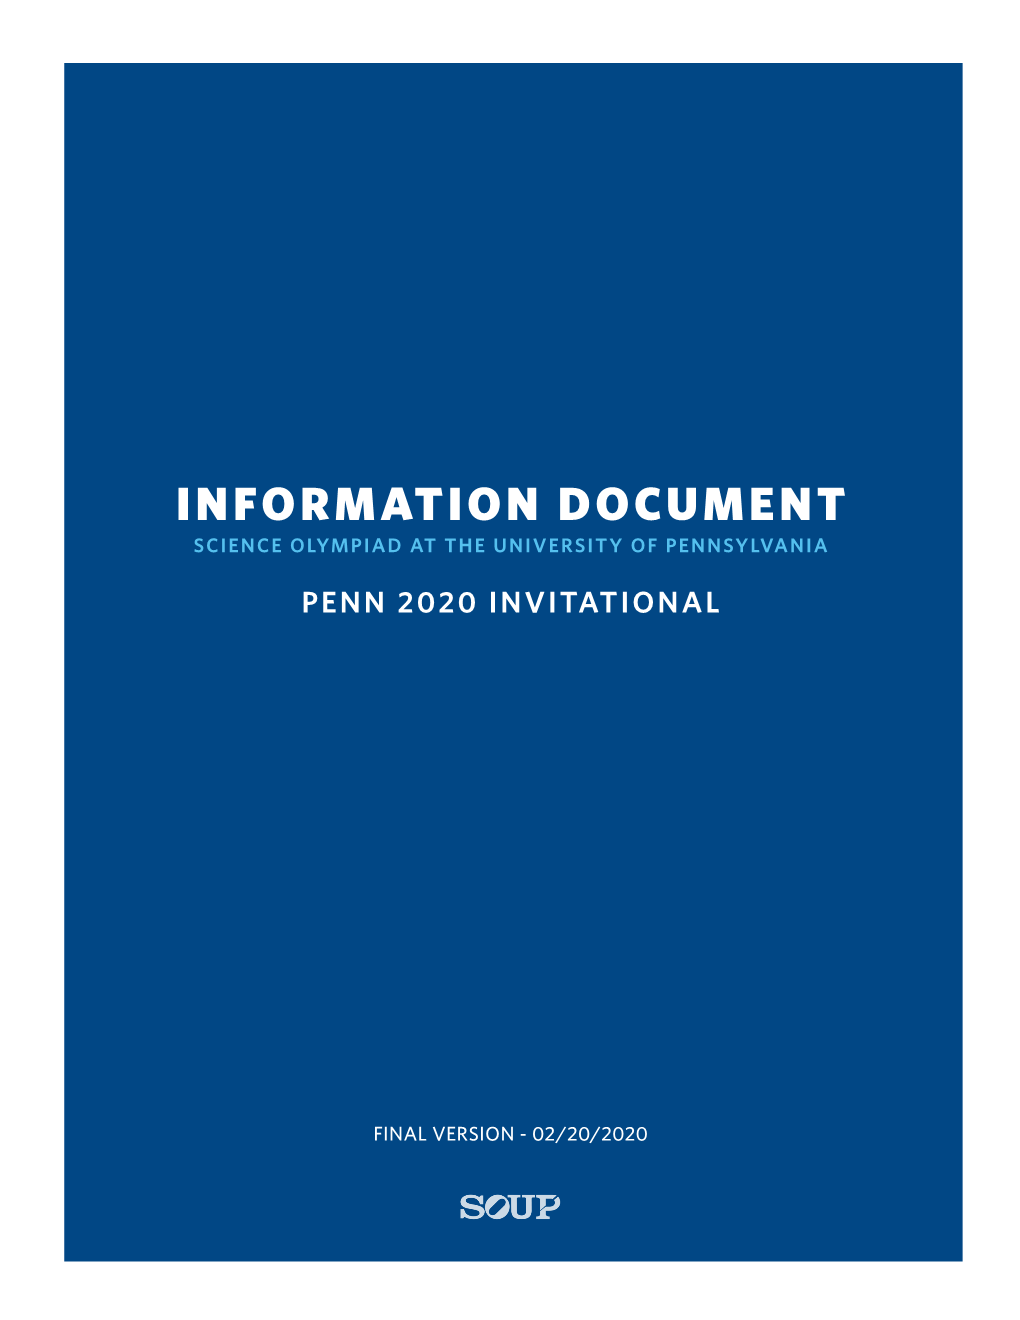 Information Document Science Olympiad at the University of Pennsylvania